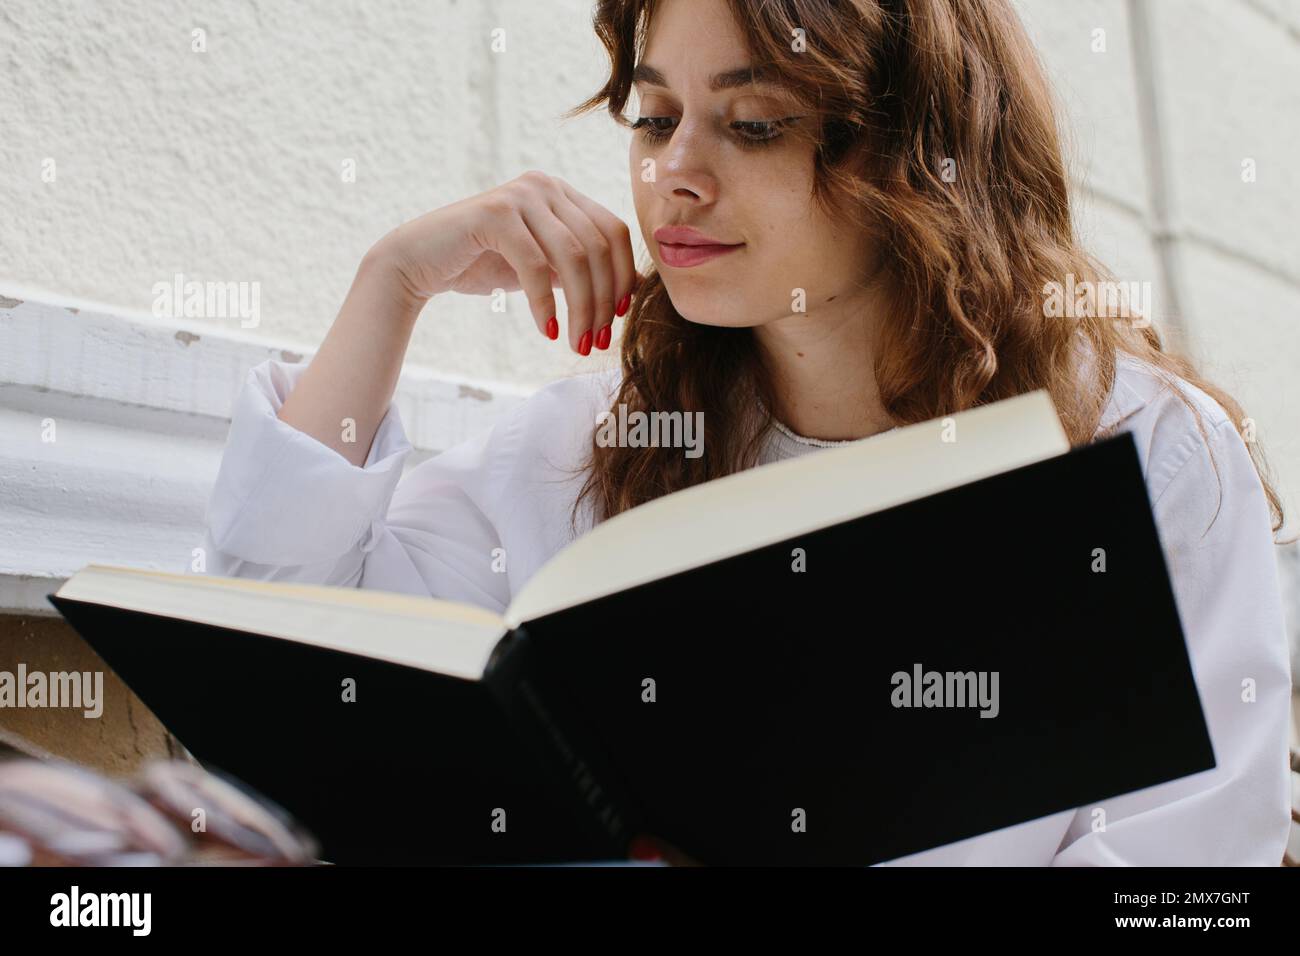 Mockup image magazine book. The girl at the coffee shop table reading book. Stock Photo